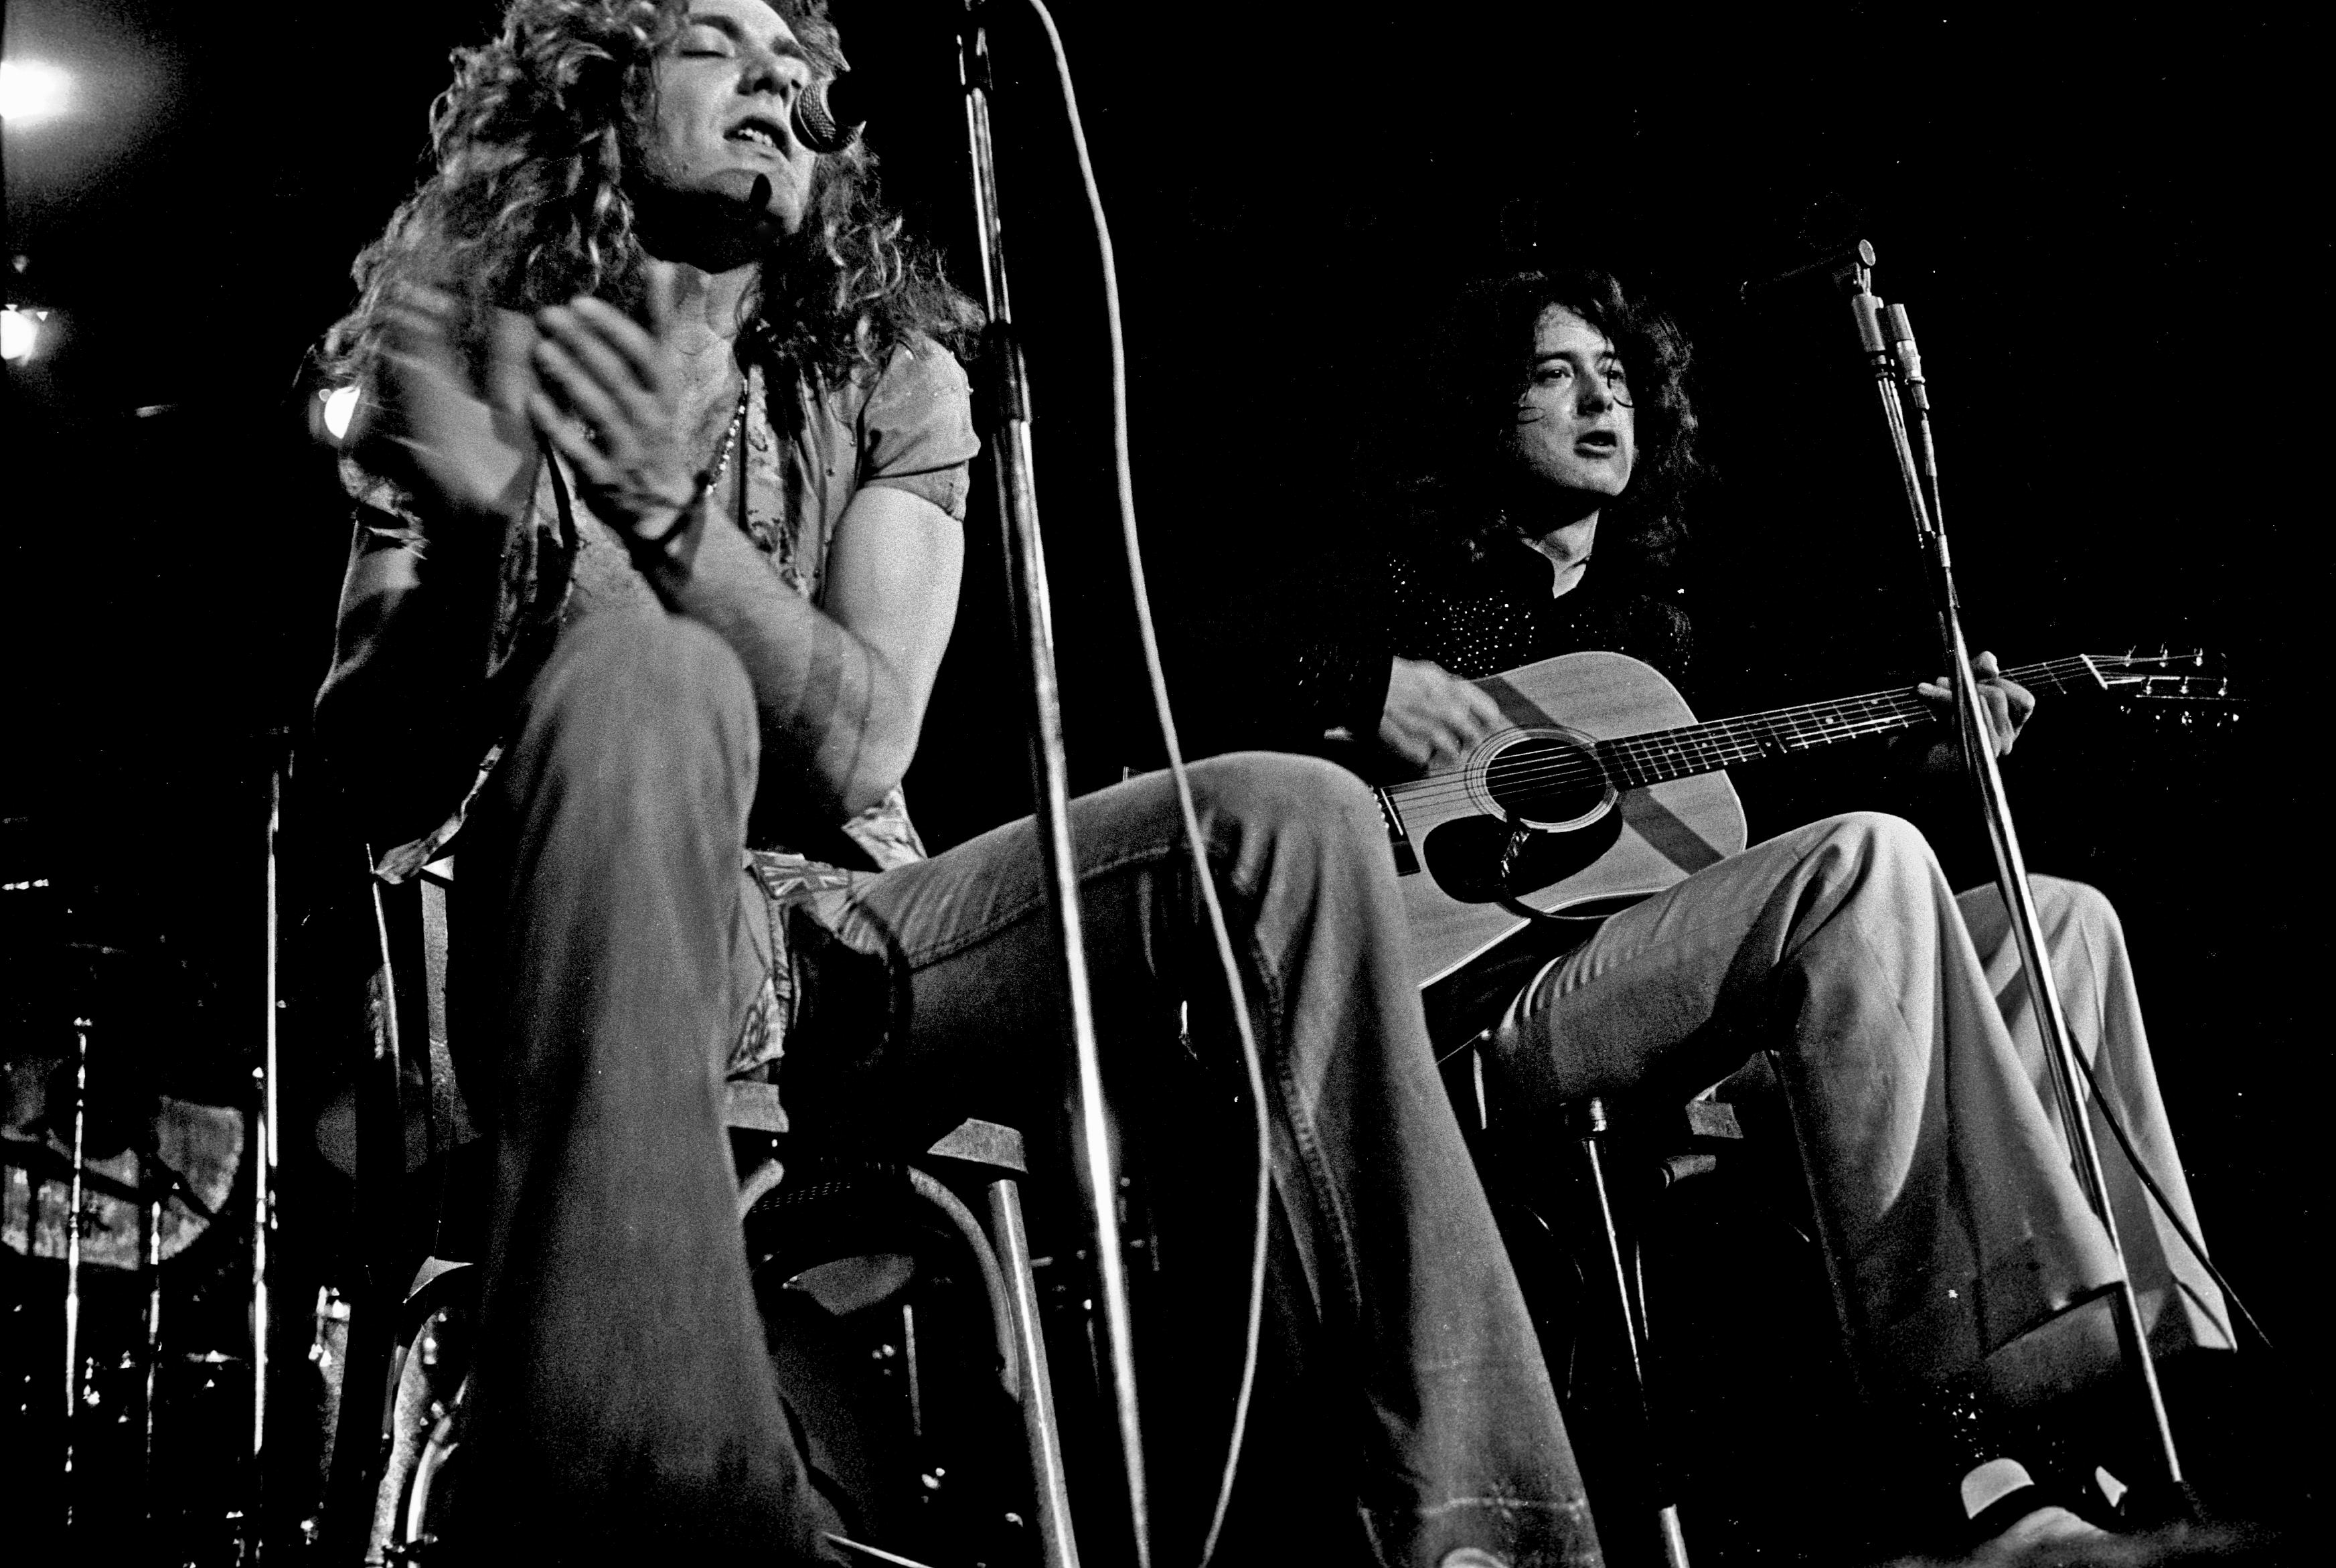 Led Zeppelin acoustic on stage. Page and Plant.